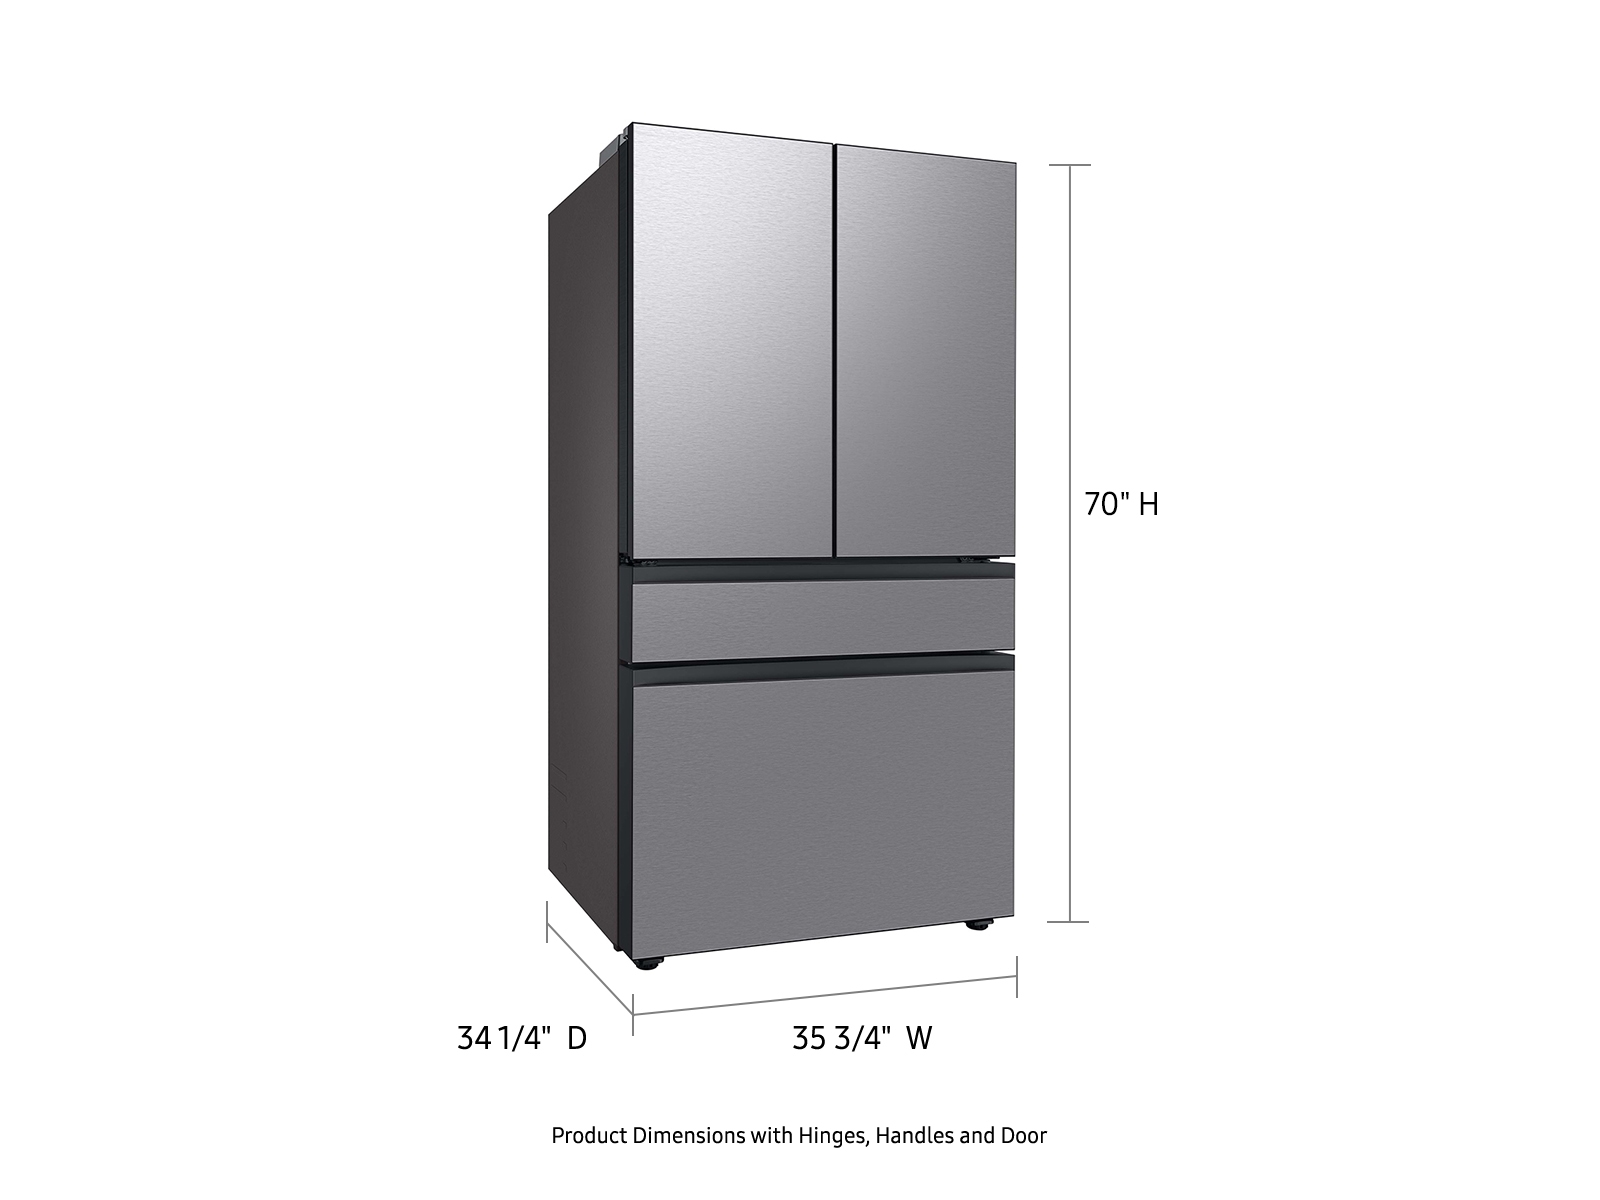 Thumbnail image of Bespoke 4-Door French Door Refrigerator (29 cu. ft.) with Beverage Center&trade; in Stainless Steel